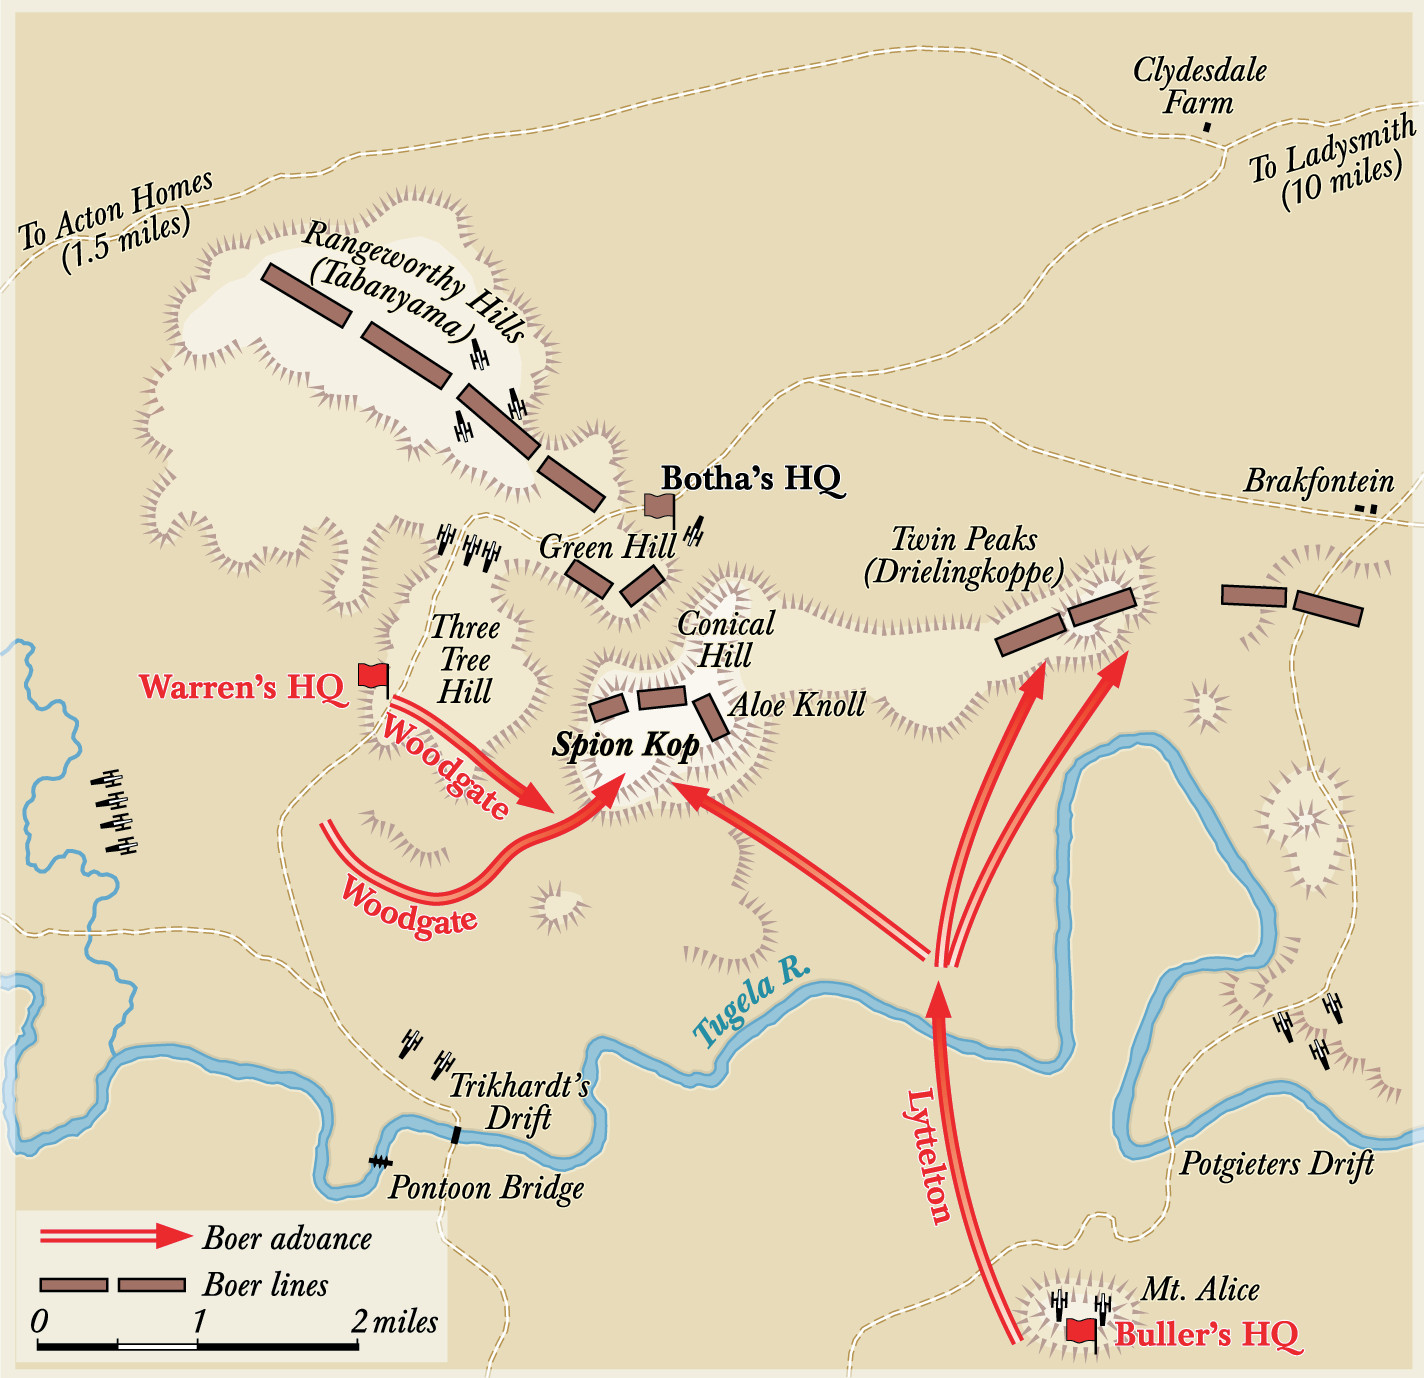 Lt. Gen. Charles Warren wanted to bombard Boer positions on Tabanyama Ridge before launching his main assault. He was overruled by General Sir Redvers Buller who was stationed several miles to the rear.